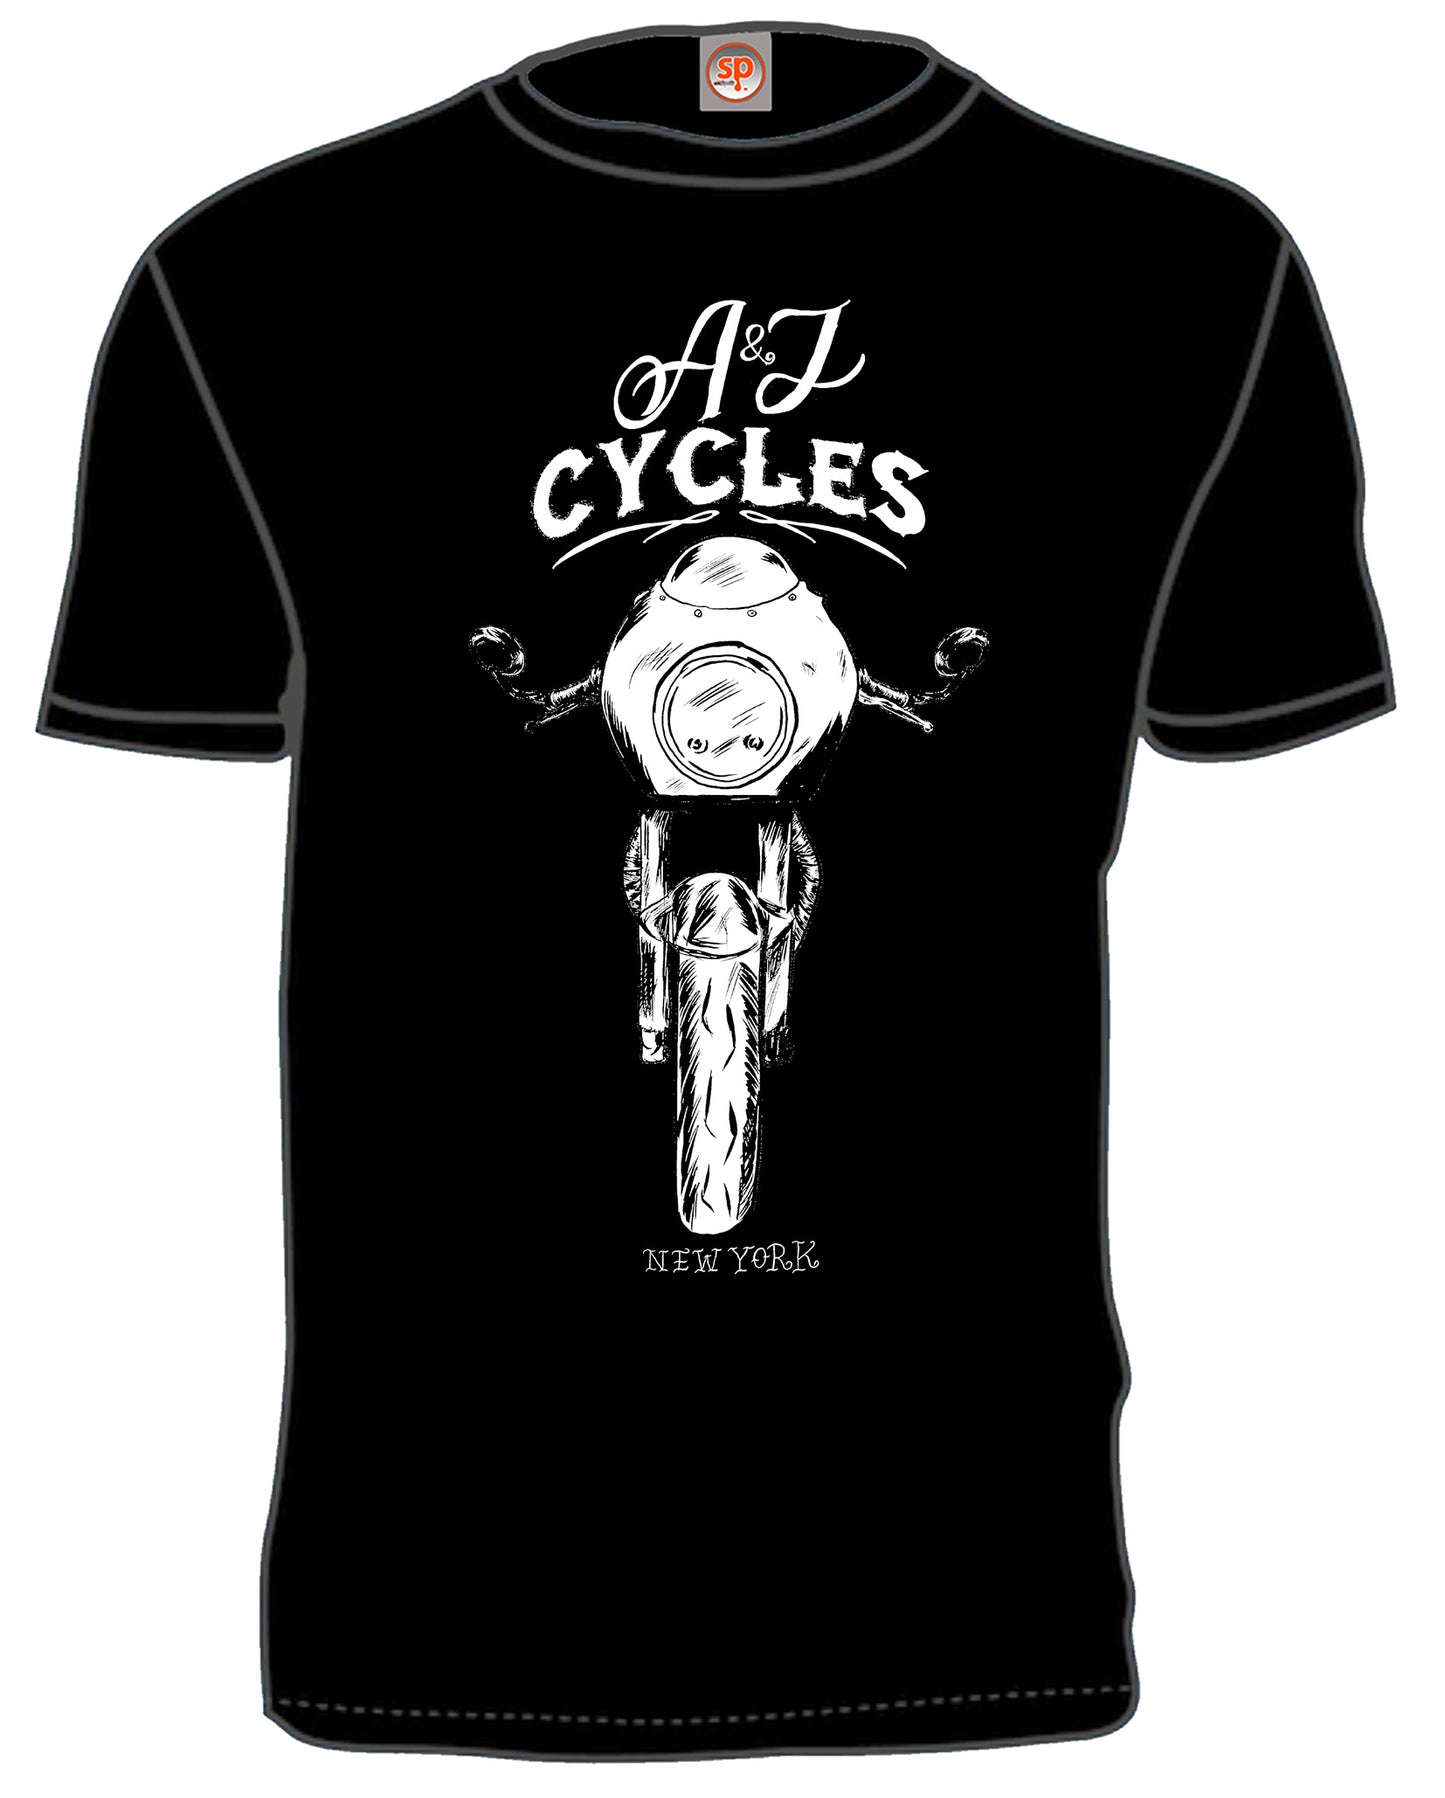 A&J Cycles “R” T-Shirt - Front Graphic